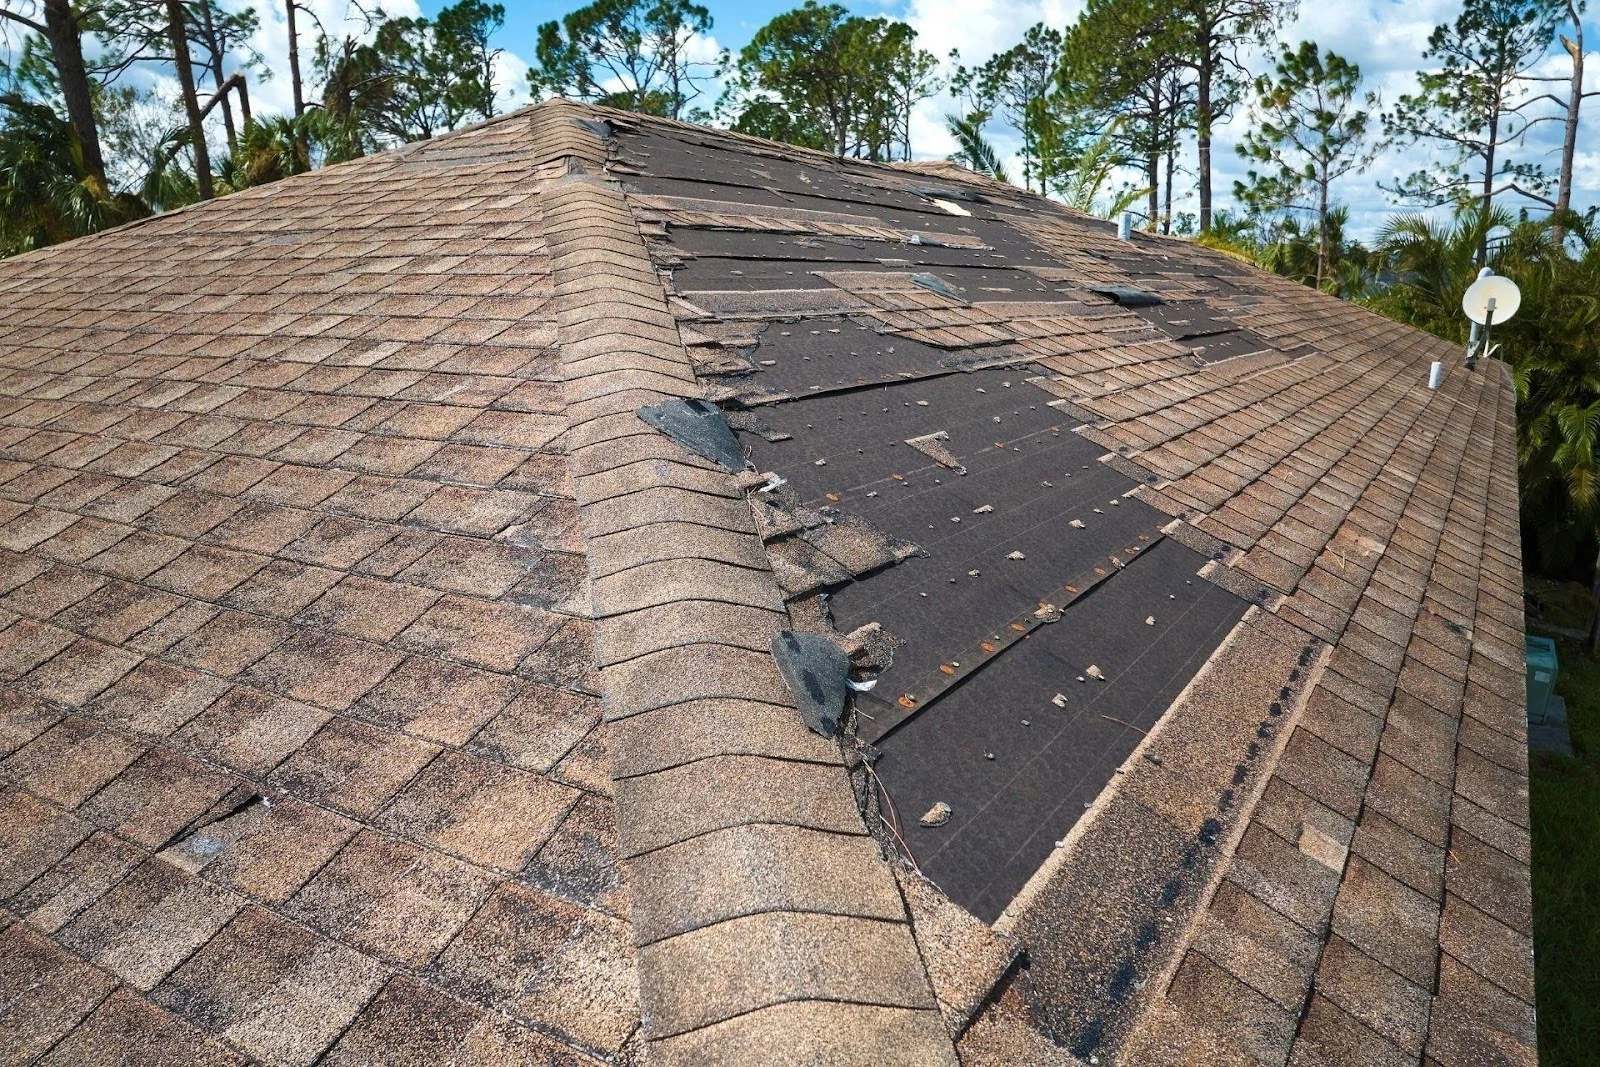 A shingle roof is damaged by strong winds.